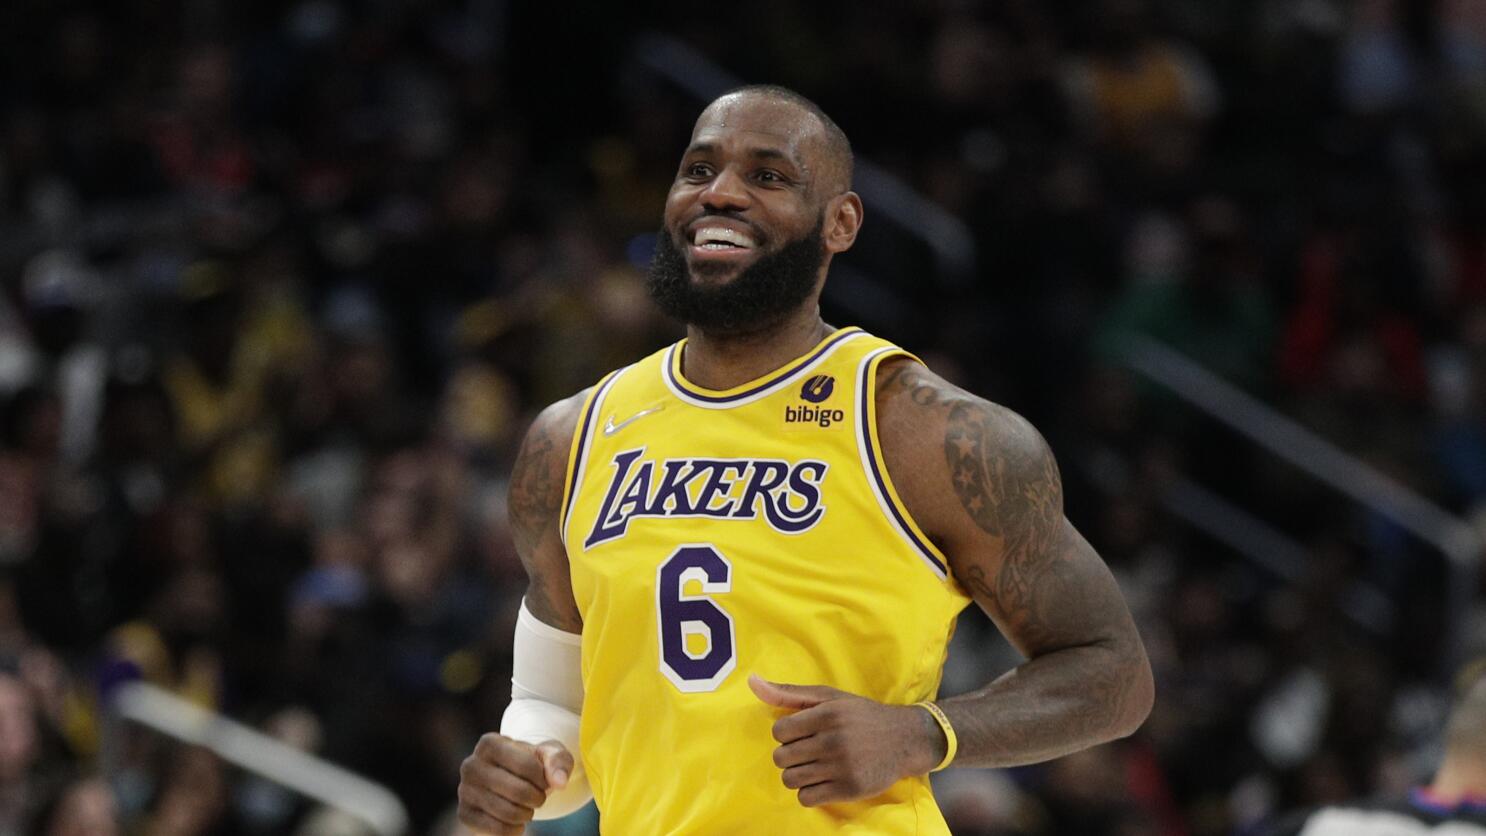 LeBron James signs $97.1 million Lakers contract extension - Los Angeles Times